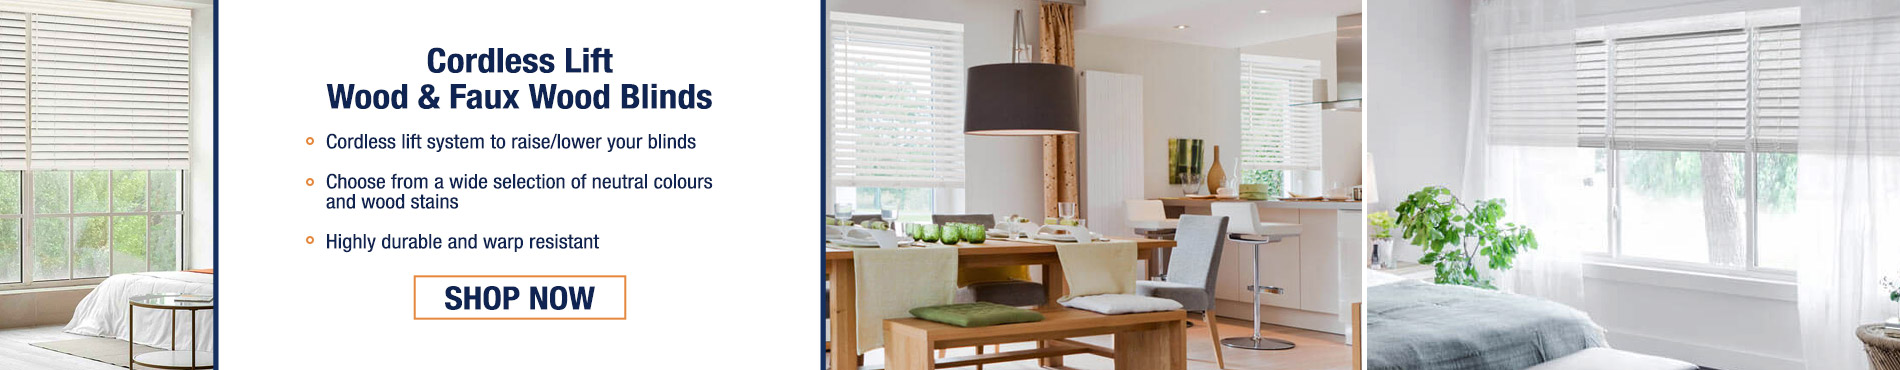 Operational wood and faux wood blinds